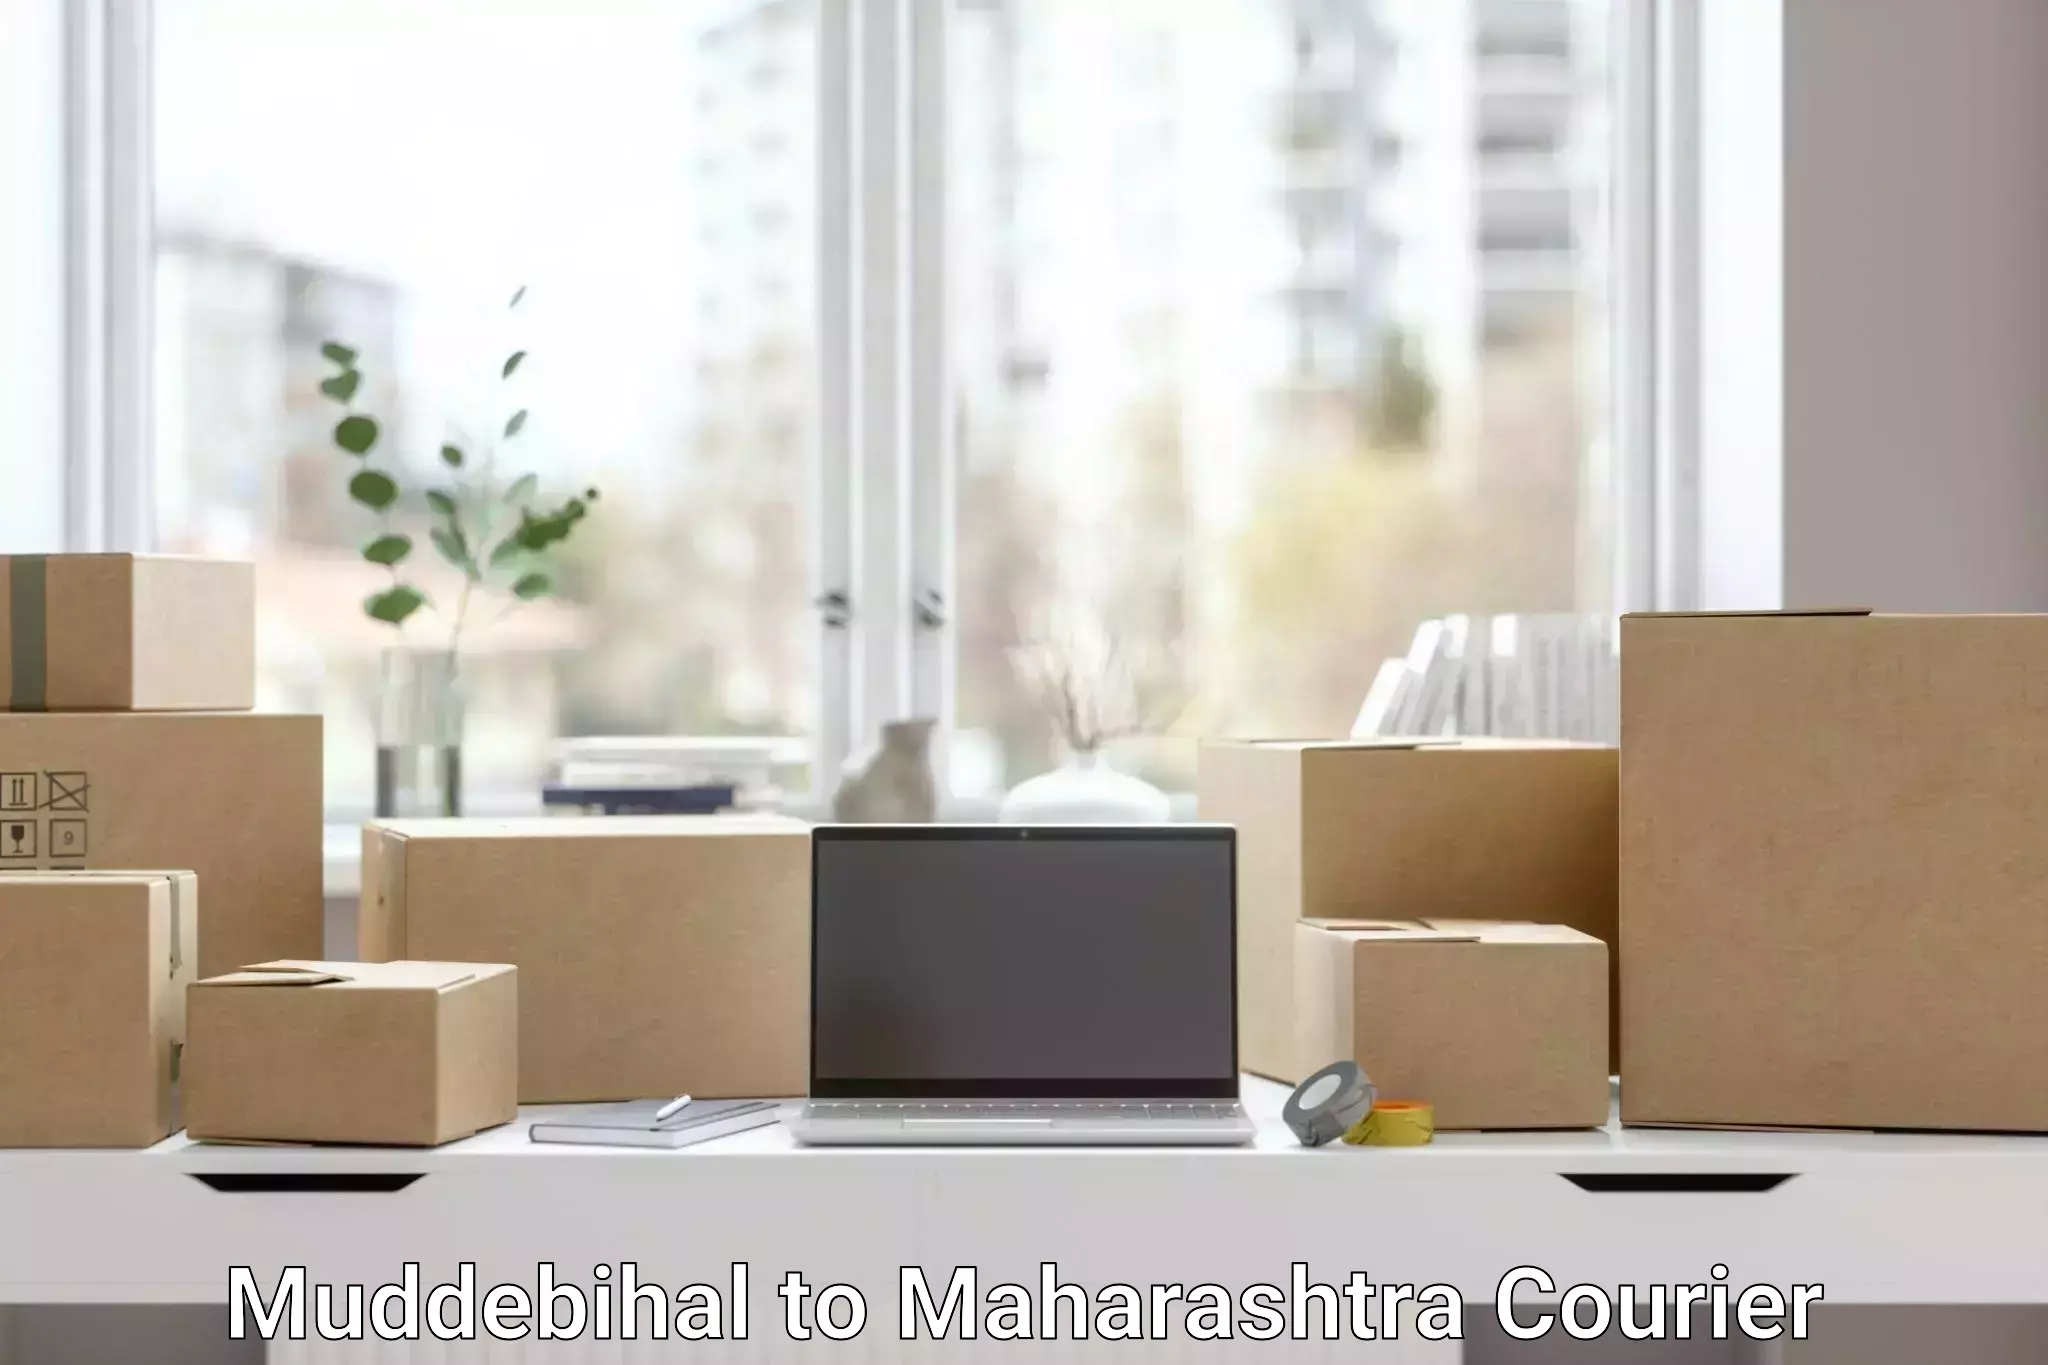 Global courier networks Muddebihal to Panvel